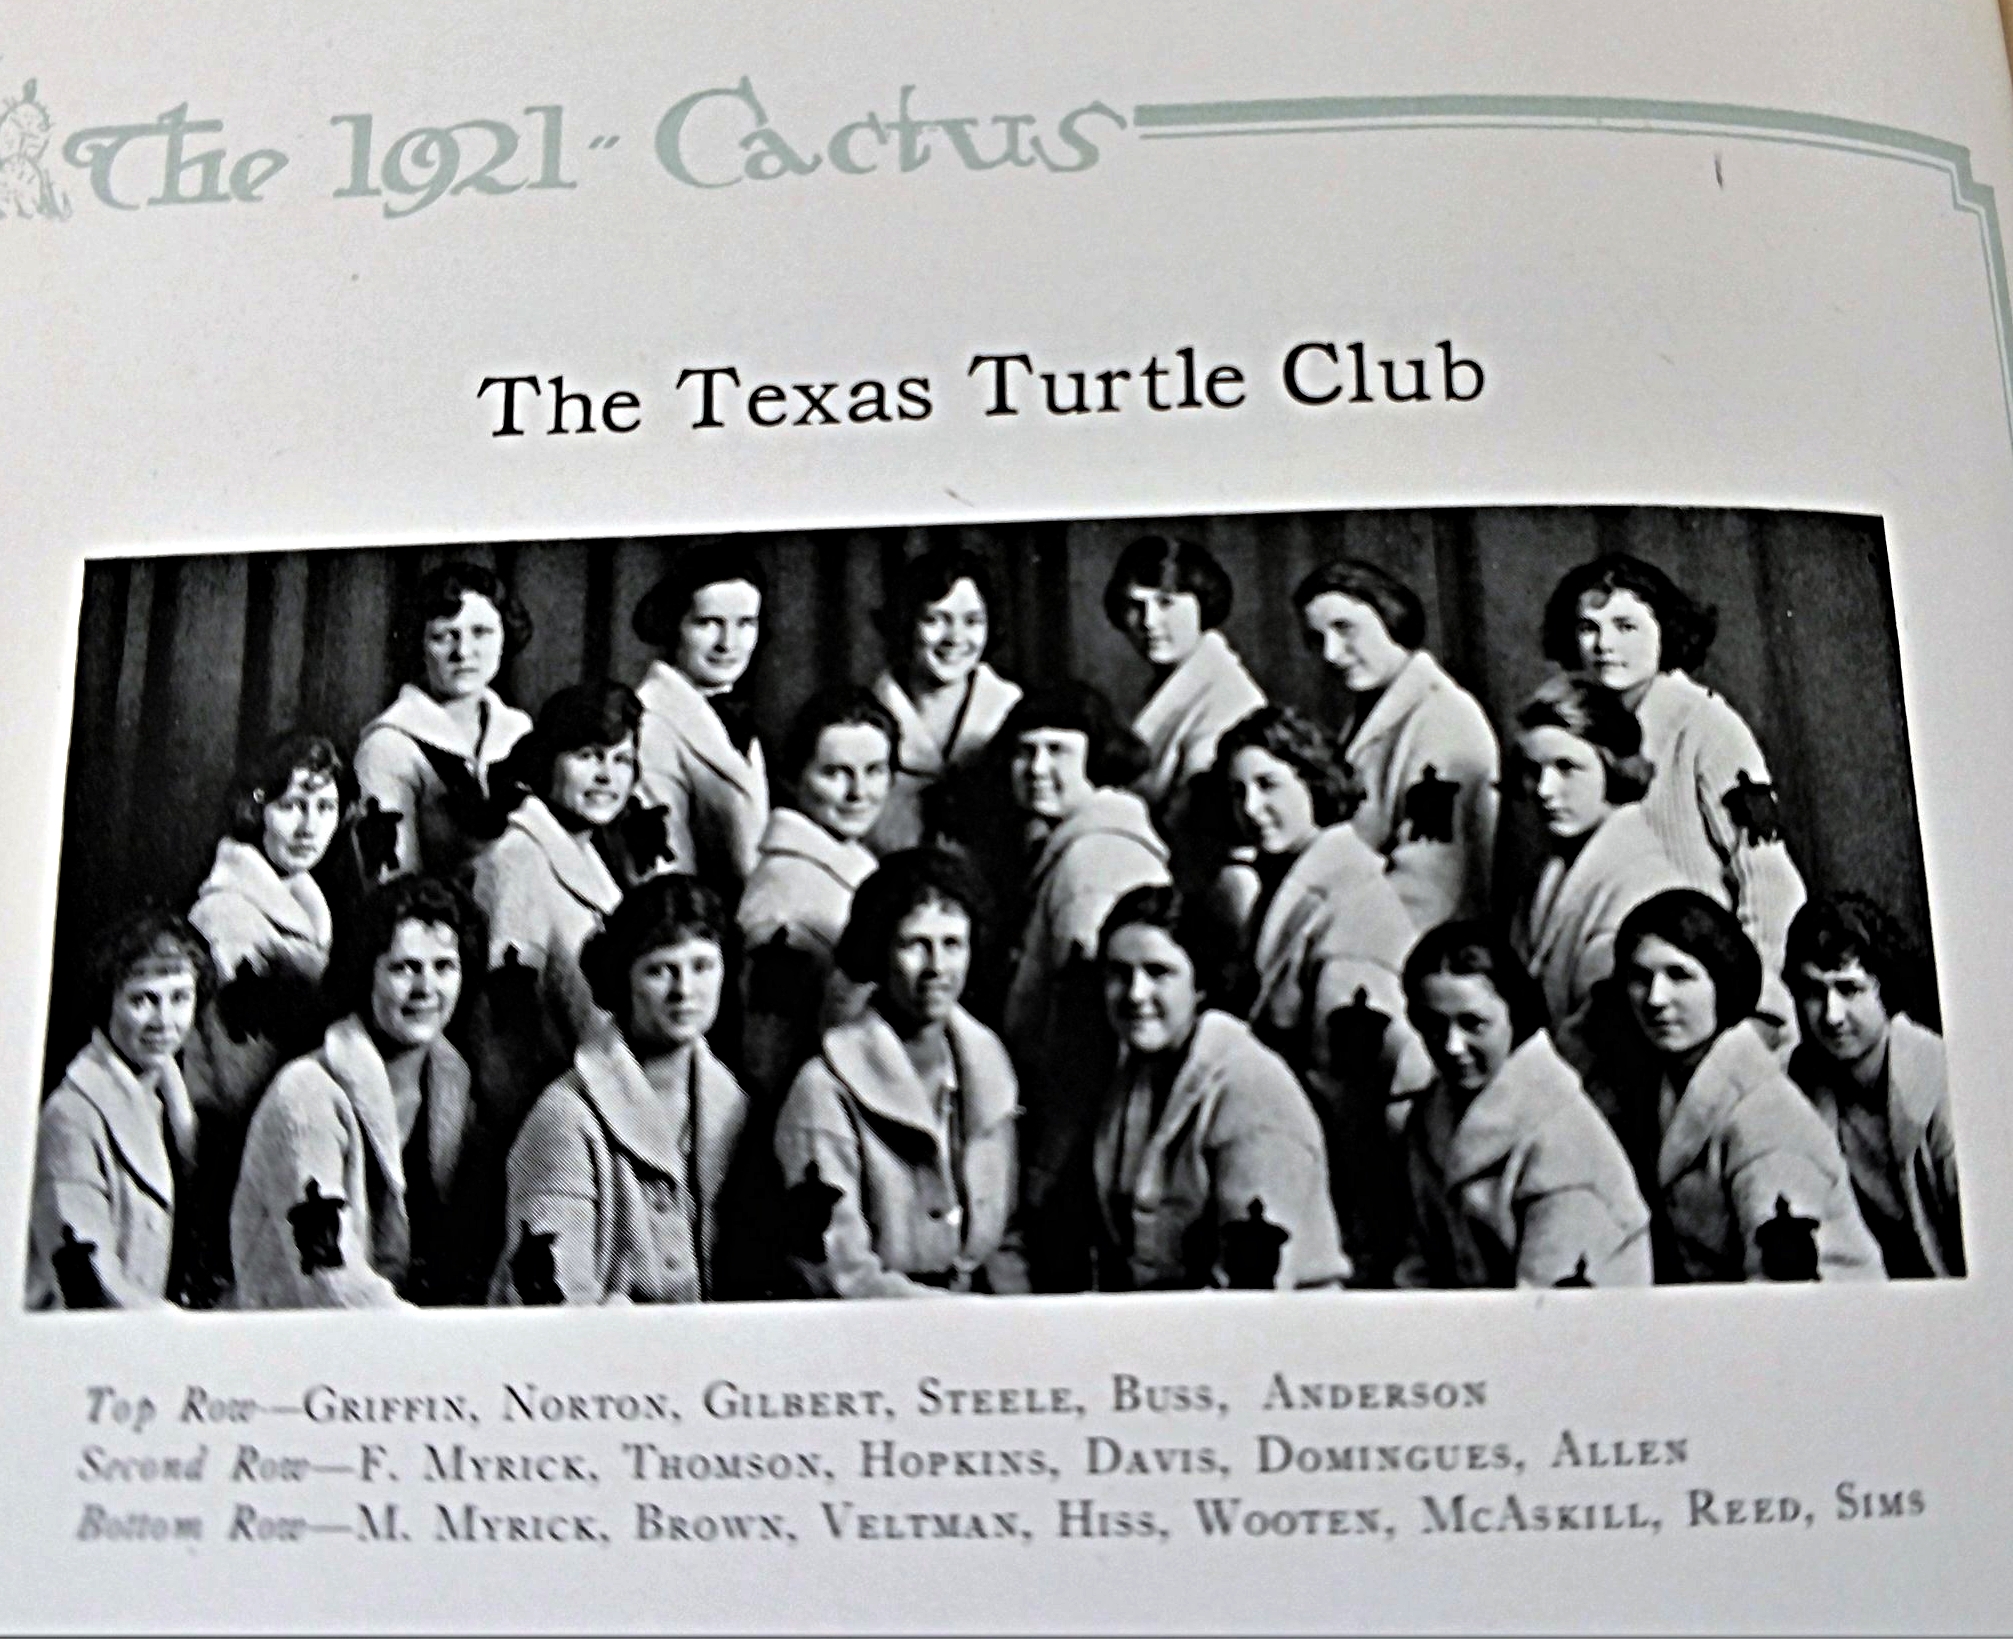  Turtle club for women swimmers begins- The sweaters have a turtle logo but by 1921 the logo was  a "T".  